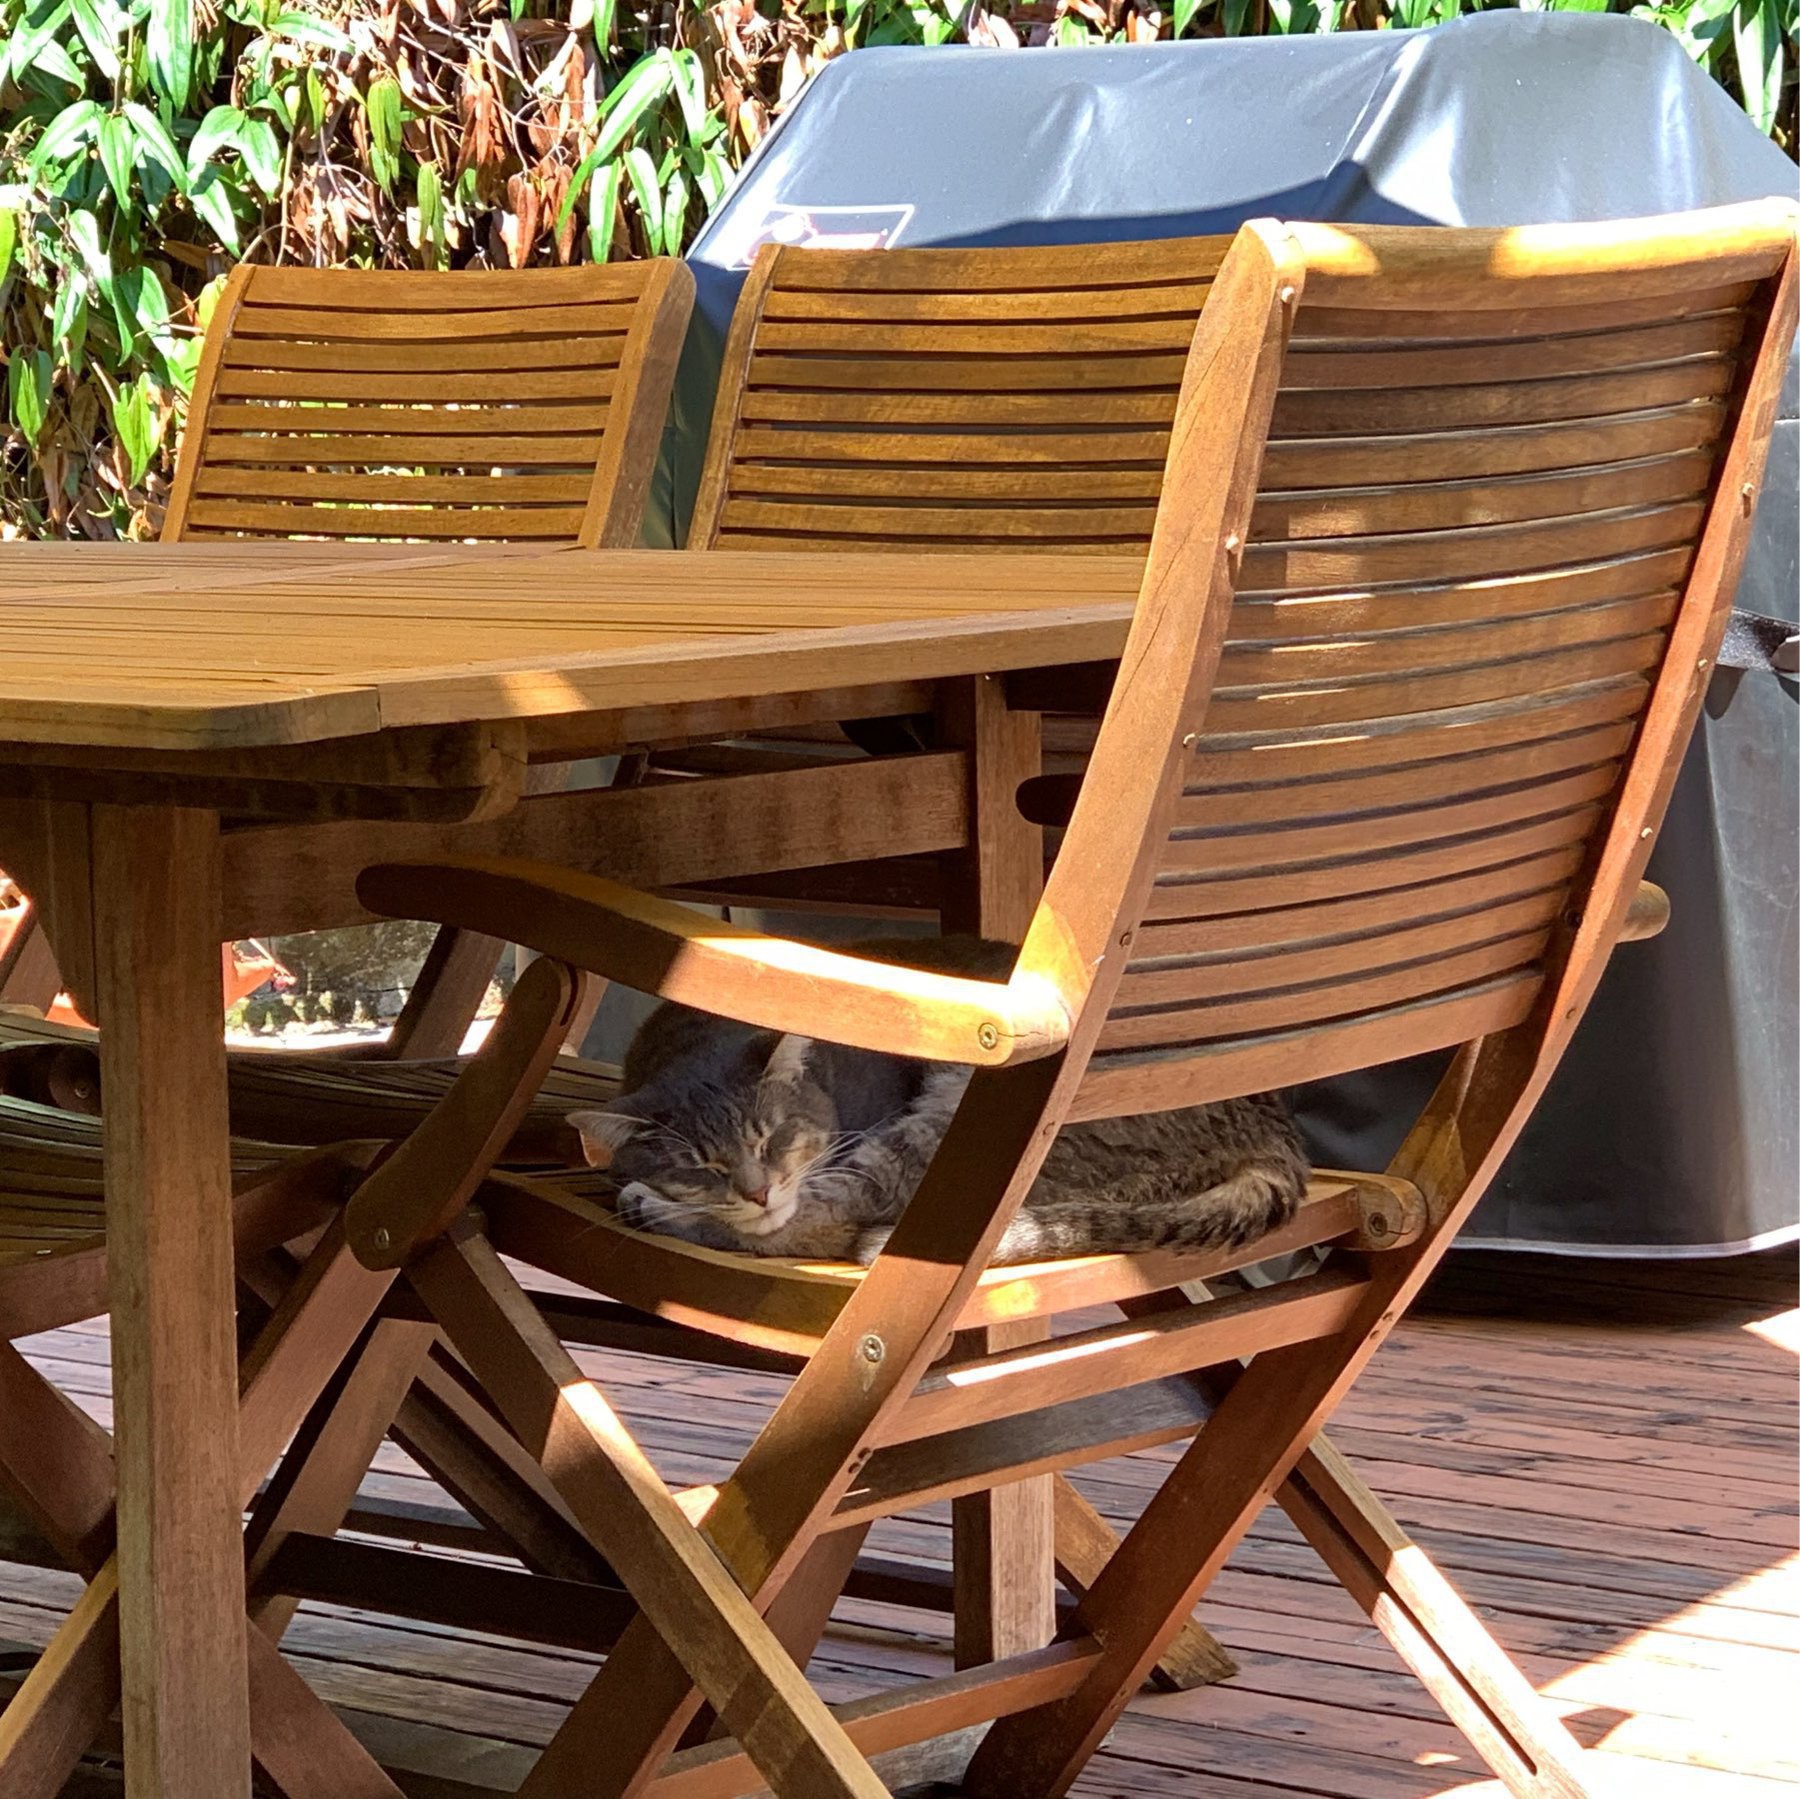 Cat sleeping on outdoor dining chair